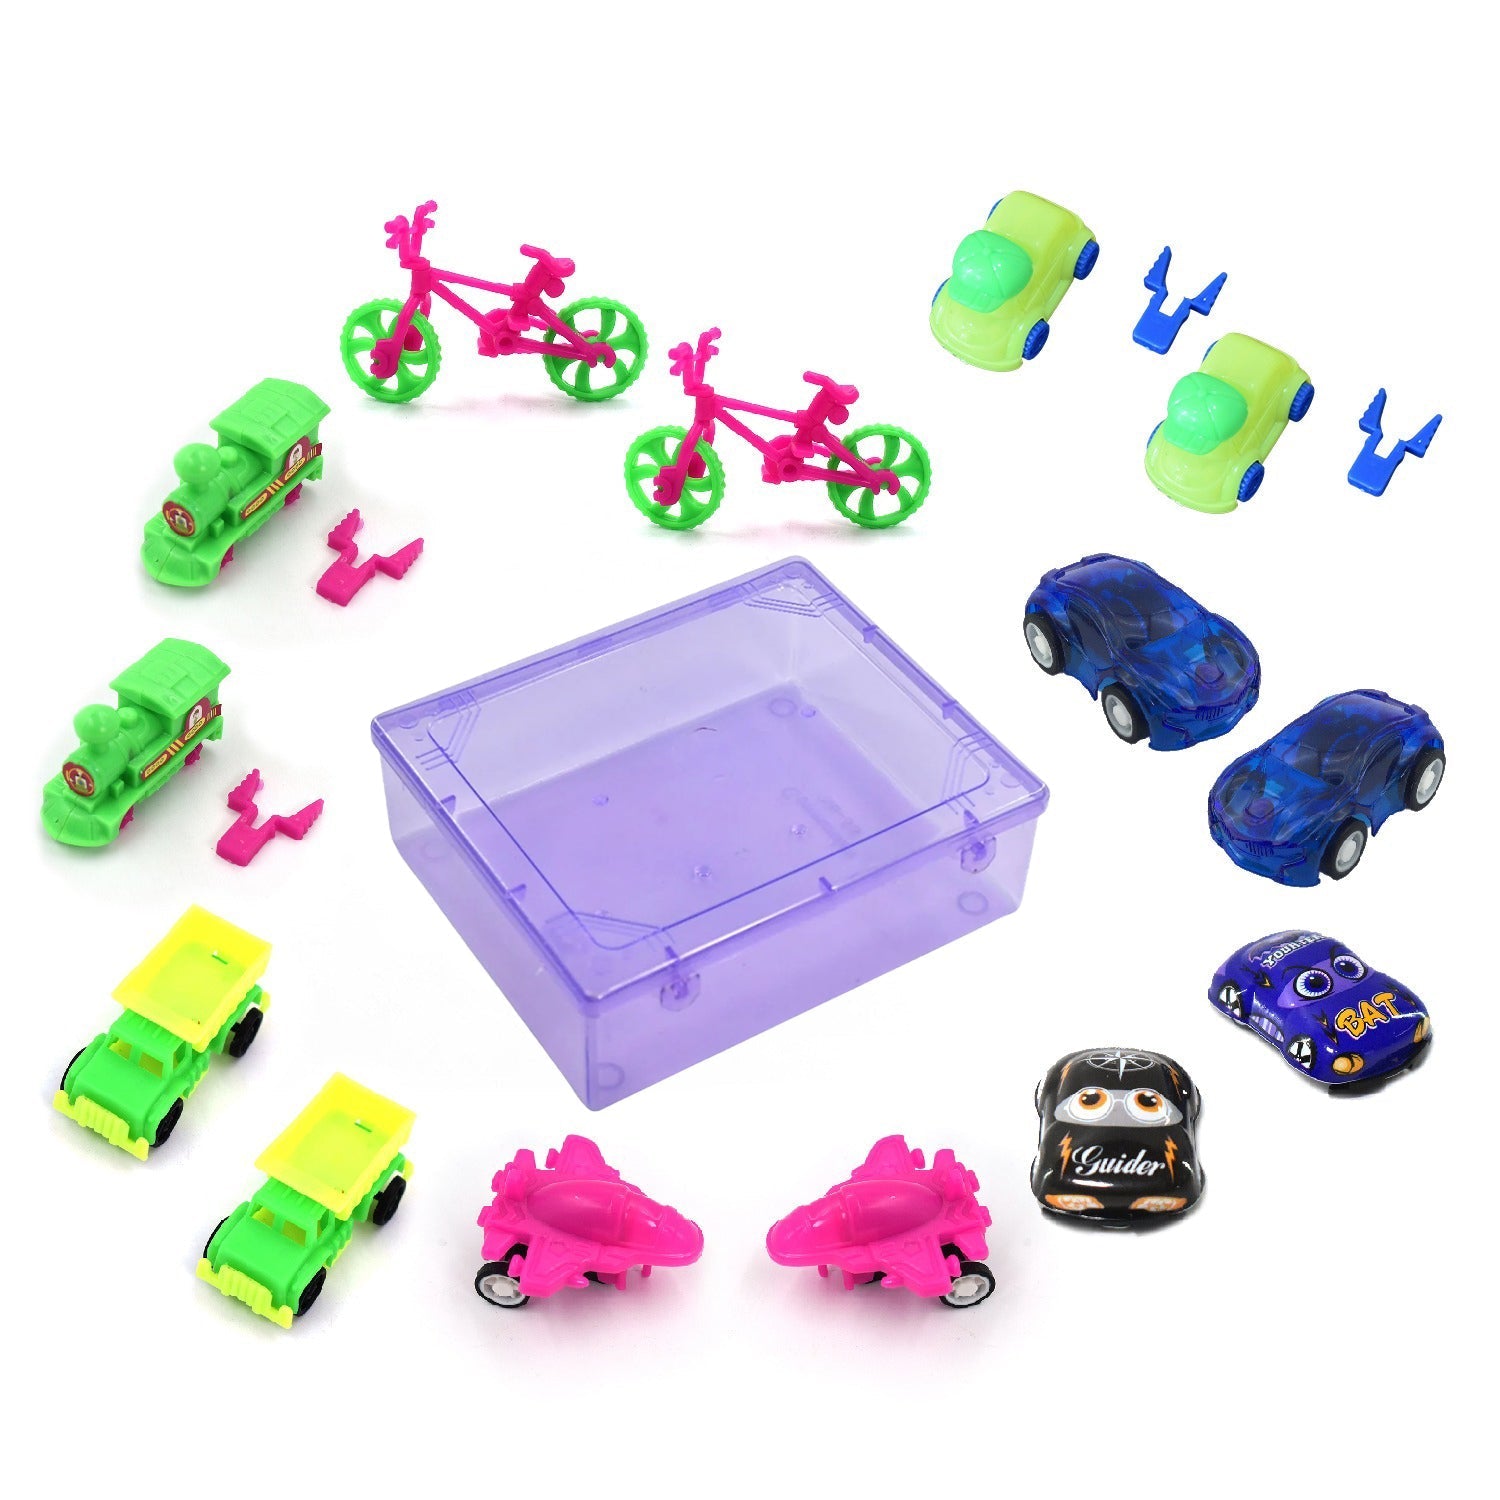 4402 Toys for Kids Friction Powered Vehicle Toy for Baby Push & Go Toys Combo Set for Boys & Girls ( Pack of 15) DeoDap